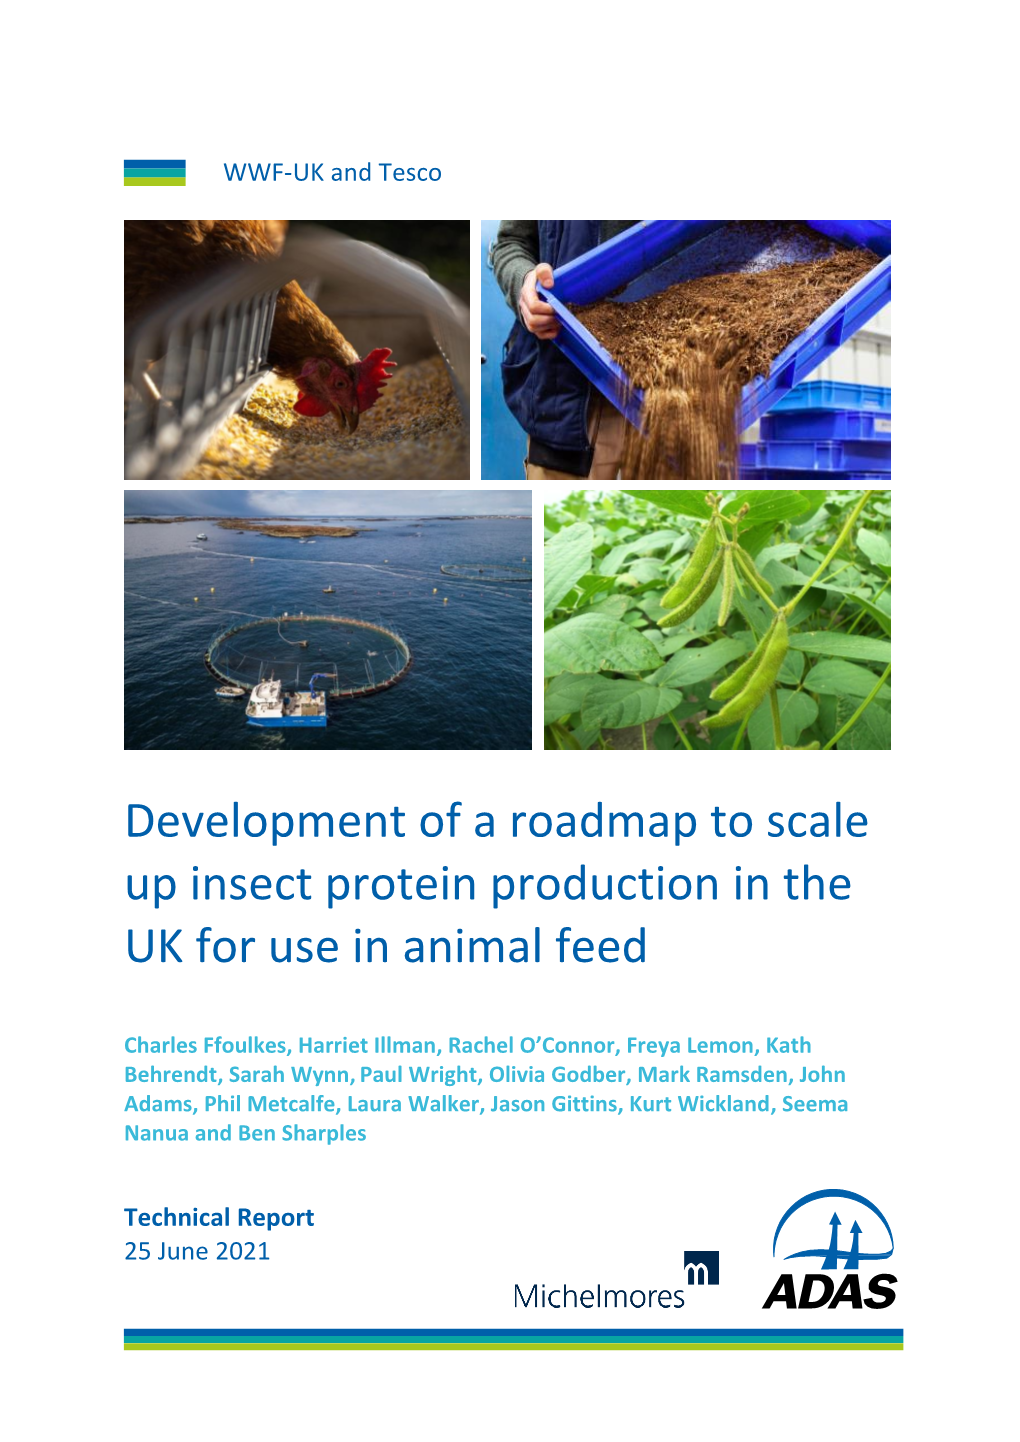 Development of a Roadmap to Scale up Insect Protein Production in the UK for Use in Animal Feed